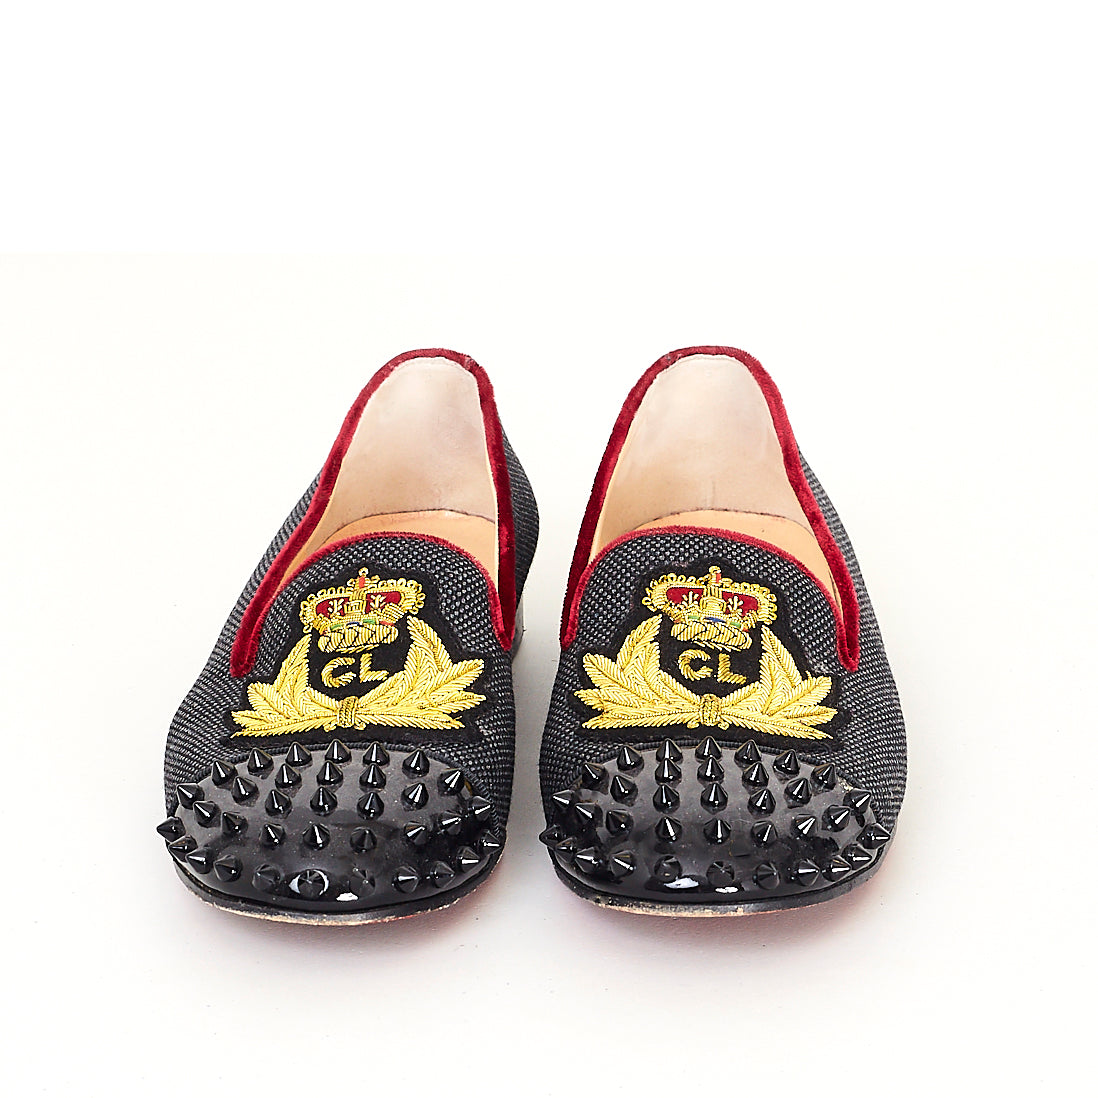 Studded Cap Toe Crest Loafers